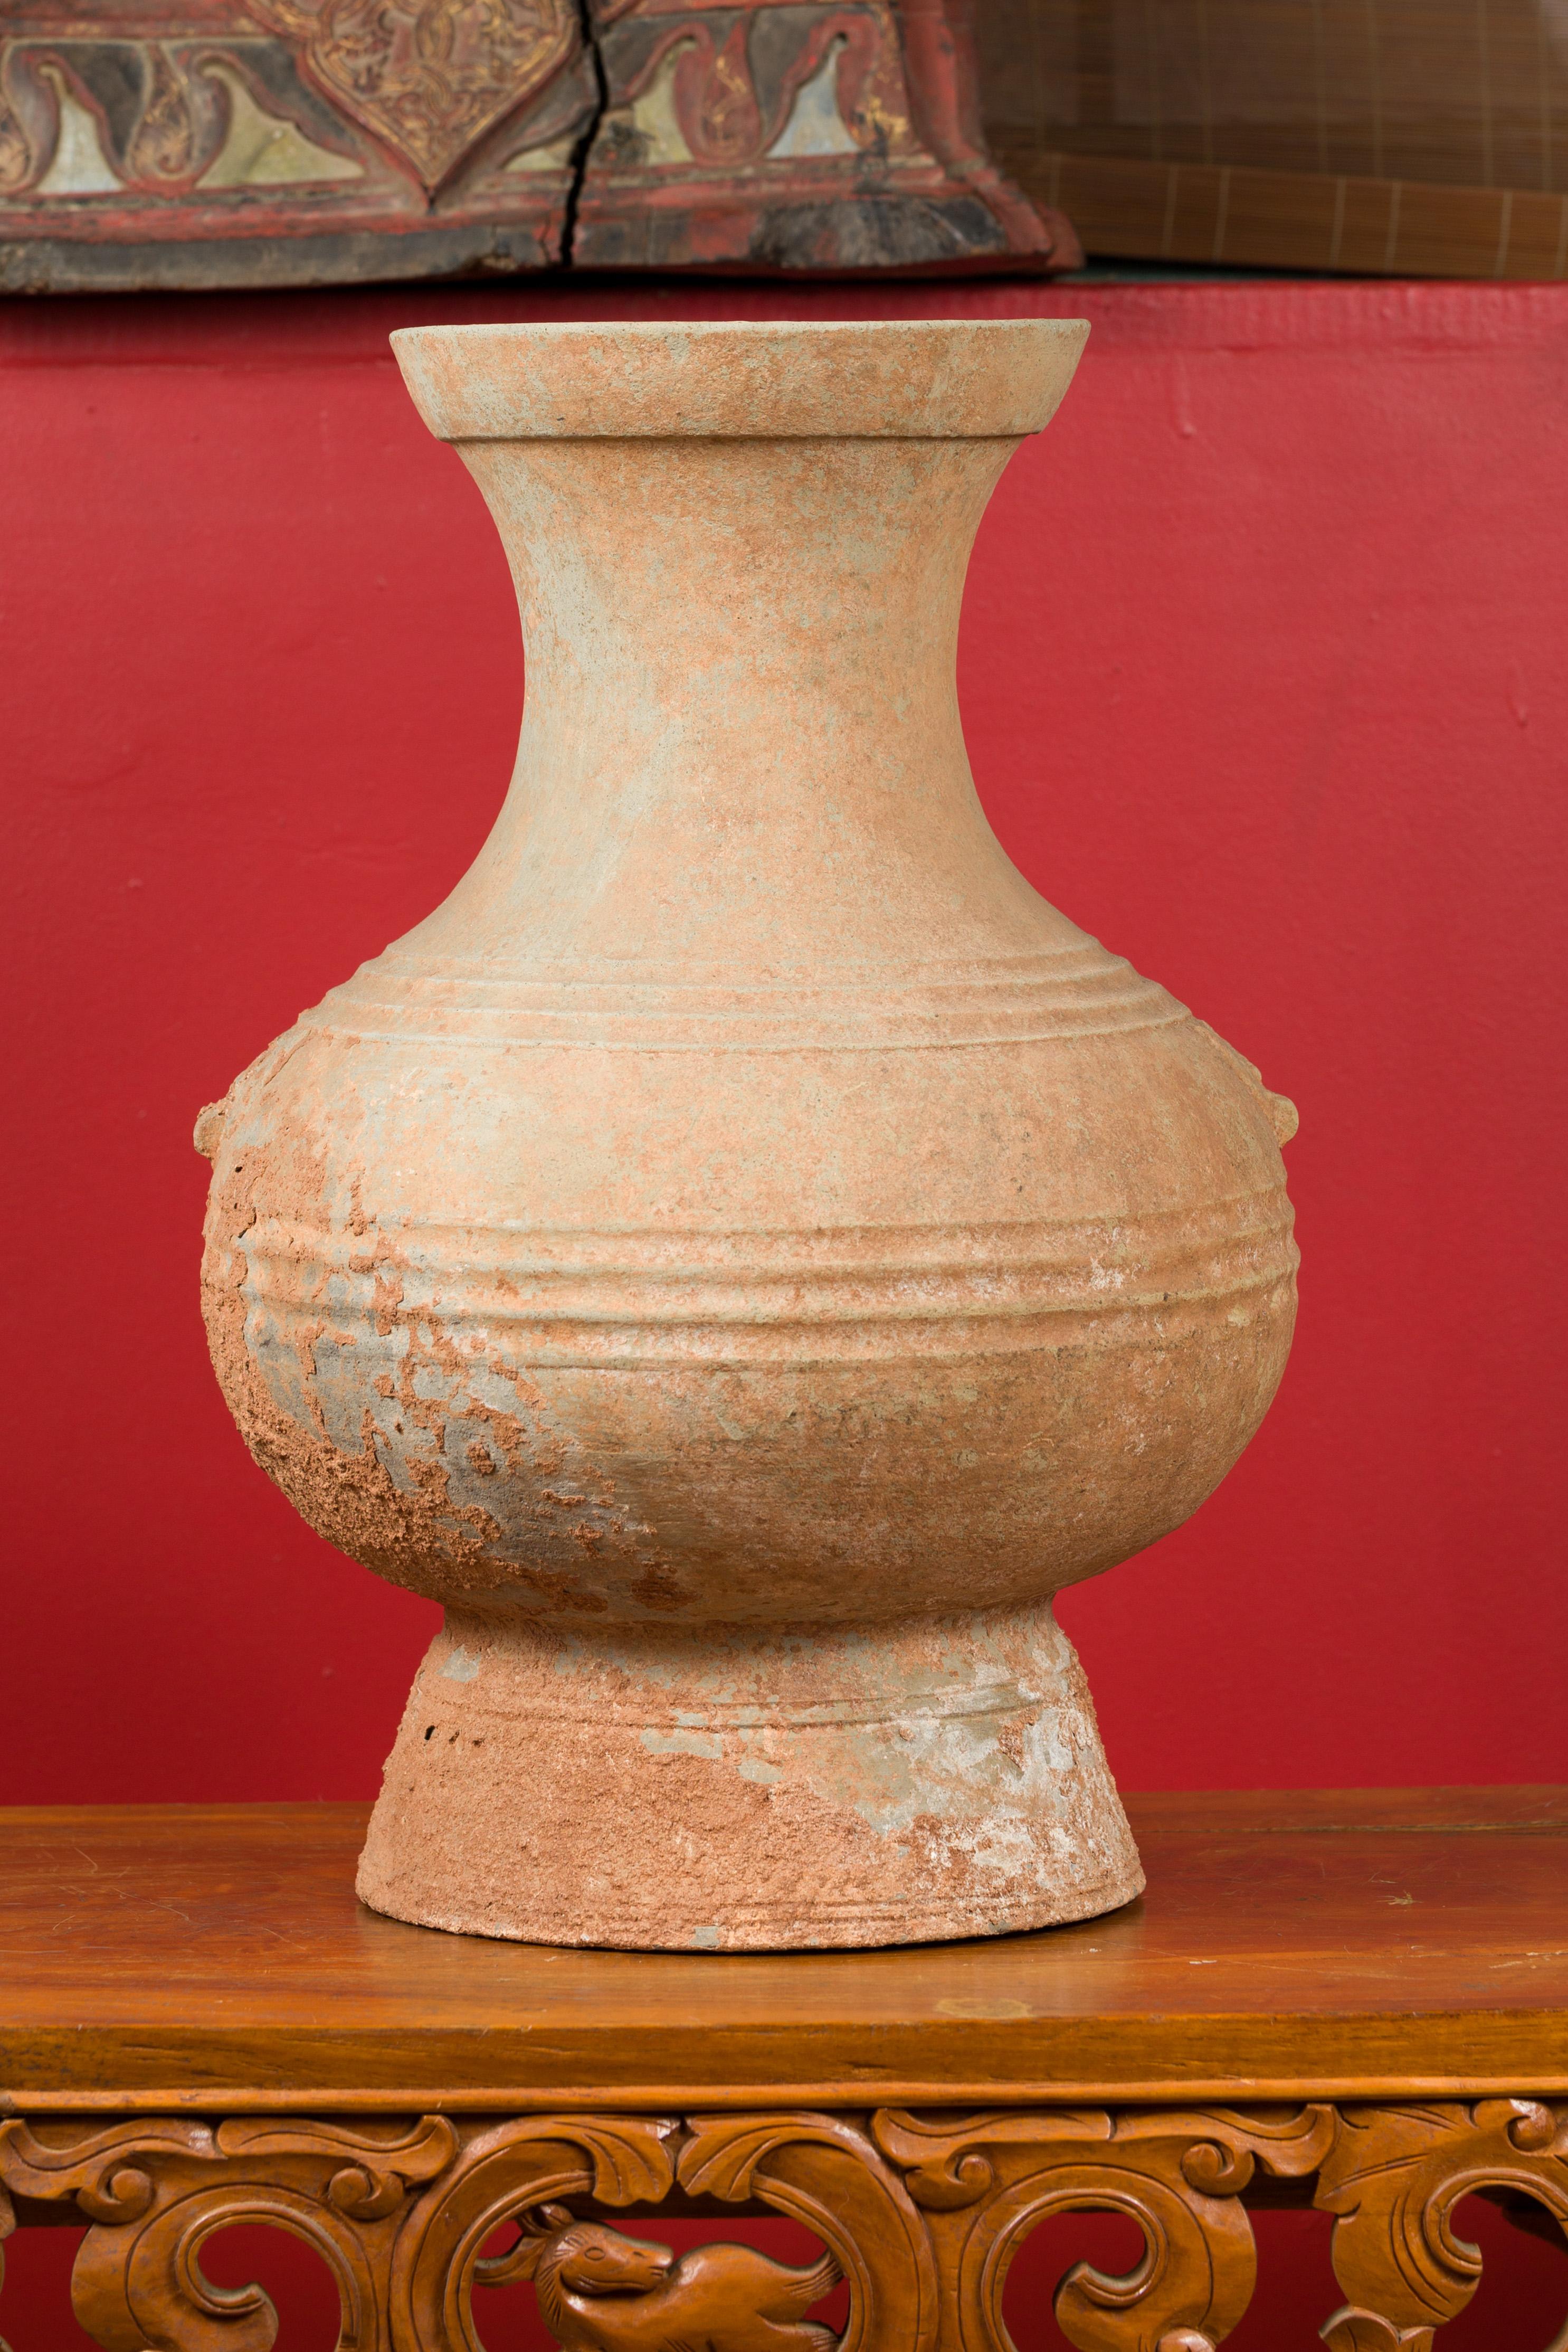 A Chinese Han dynasty period unglazed terracotta Hu vessel circa 202 BC-200 AD, with incised decor, mineral deposits and lateral accents. Crafted in China during the Han dynasty, this terracotta wine vessel, called a Hu vessel, features a generous